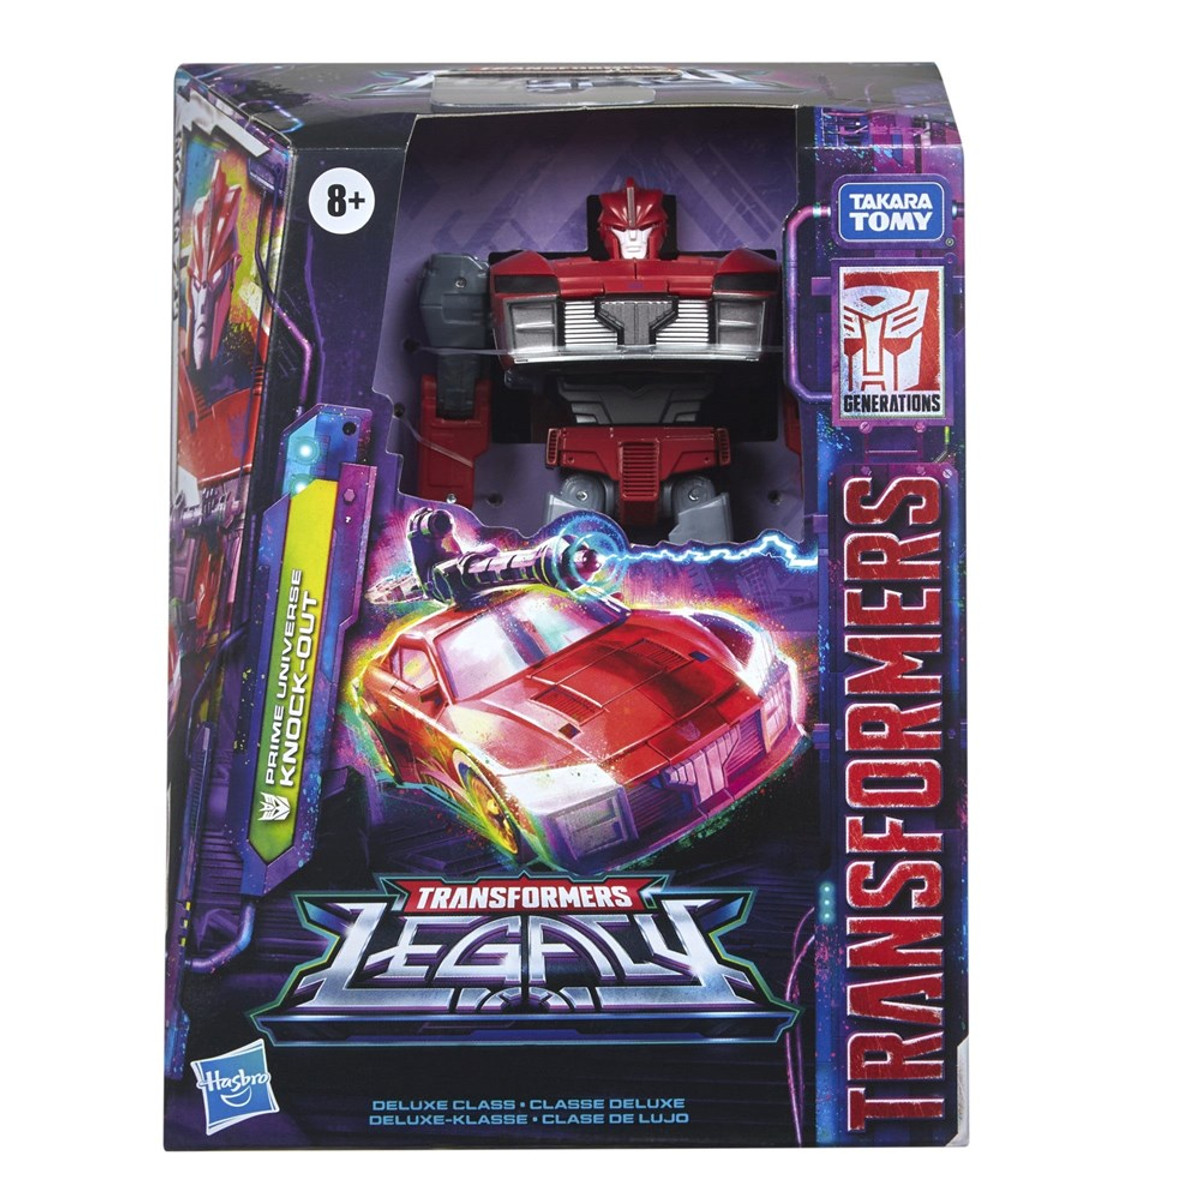 knock out transformers prime deluxe class hasbro robots in…